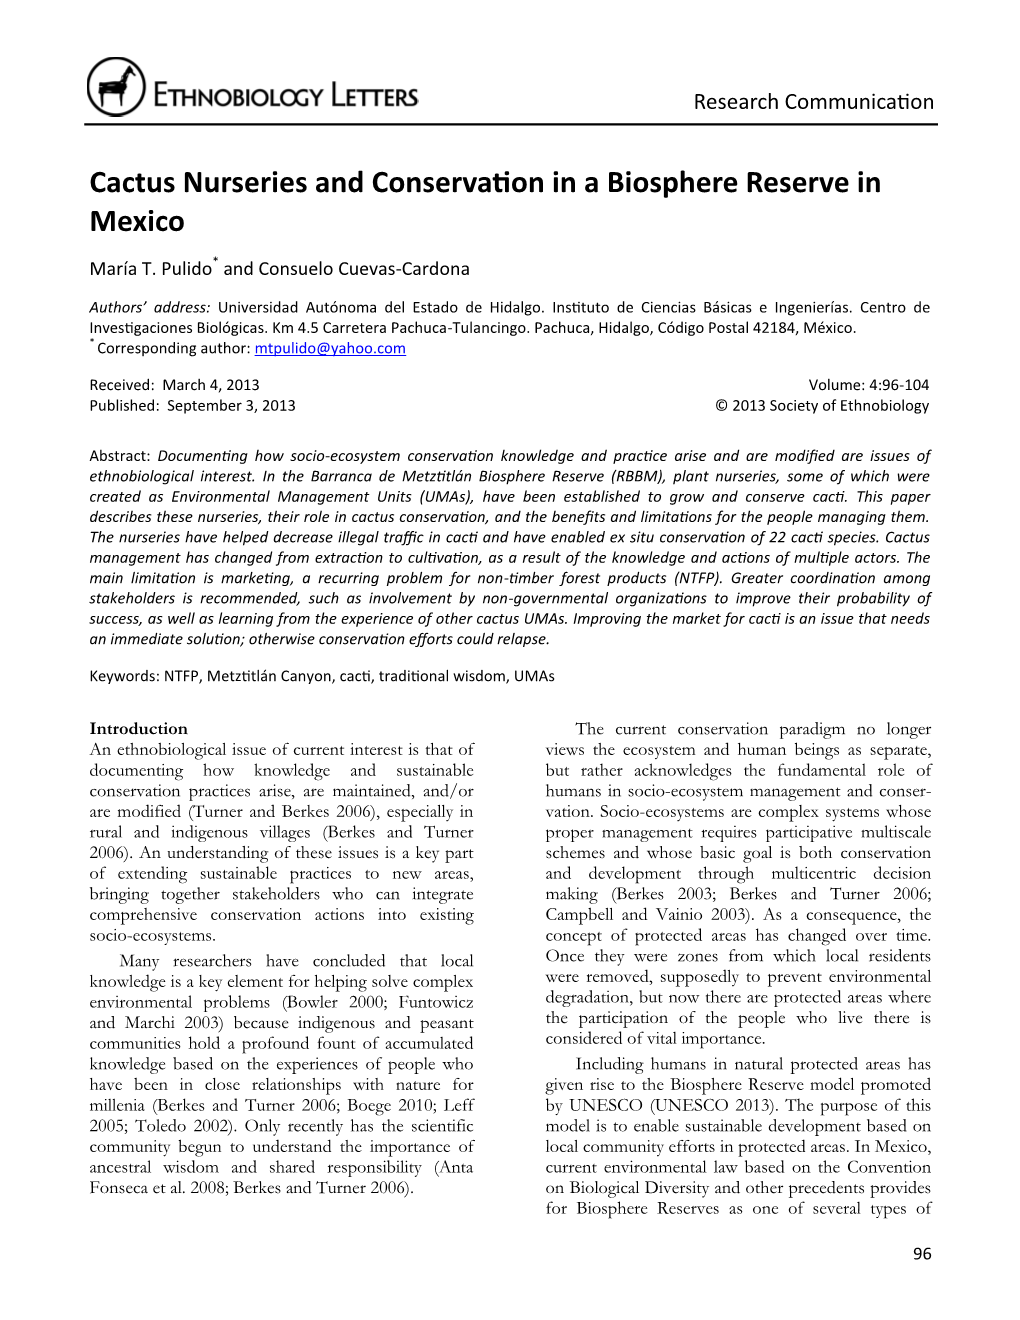 Cactus Nurseries and Conservation in a Biosphere Reserve in Mexico